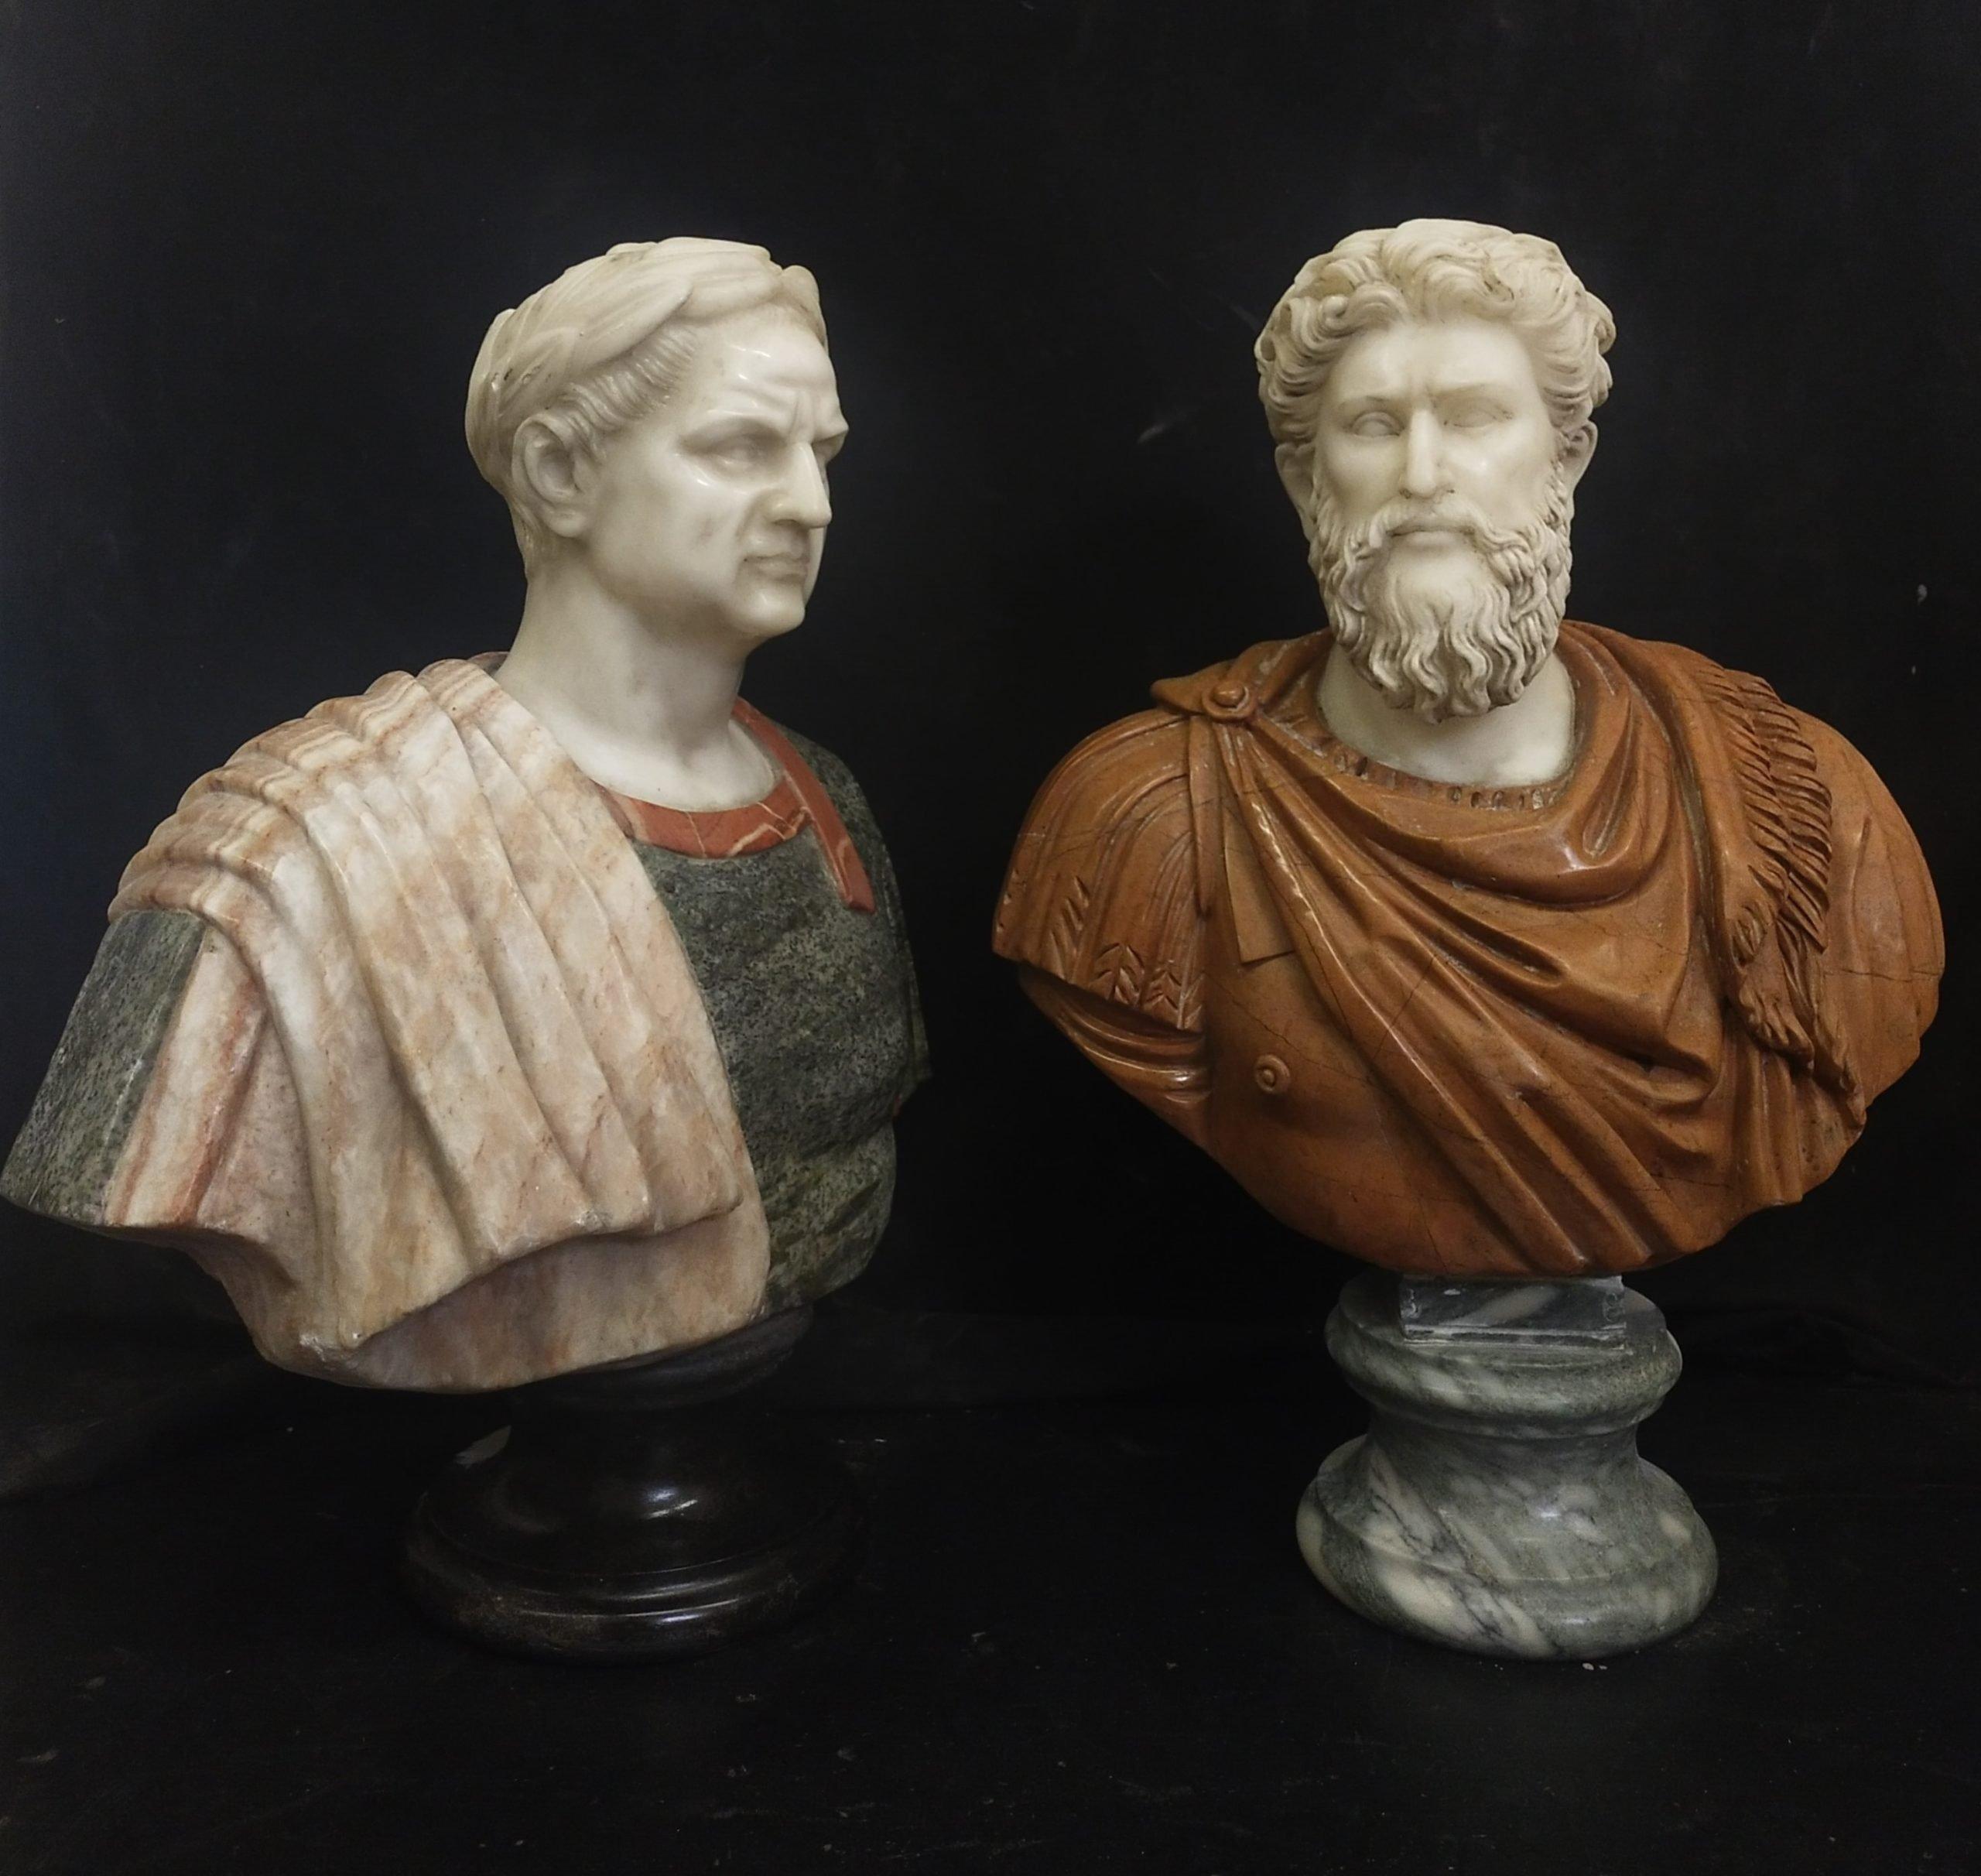 pair of busts of Roman emperors in polychrome marble,ADDITIONAL PHOTOS, INFORMATION OF THE LOT AND QUOTE FOR SHIPPING COST CAN BE REQUEST BY SENDING AN EMAIL